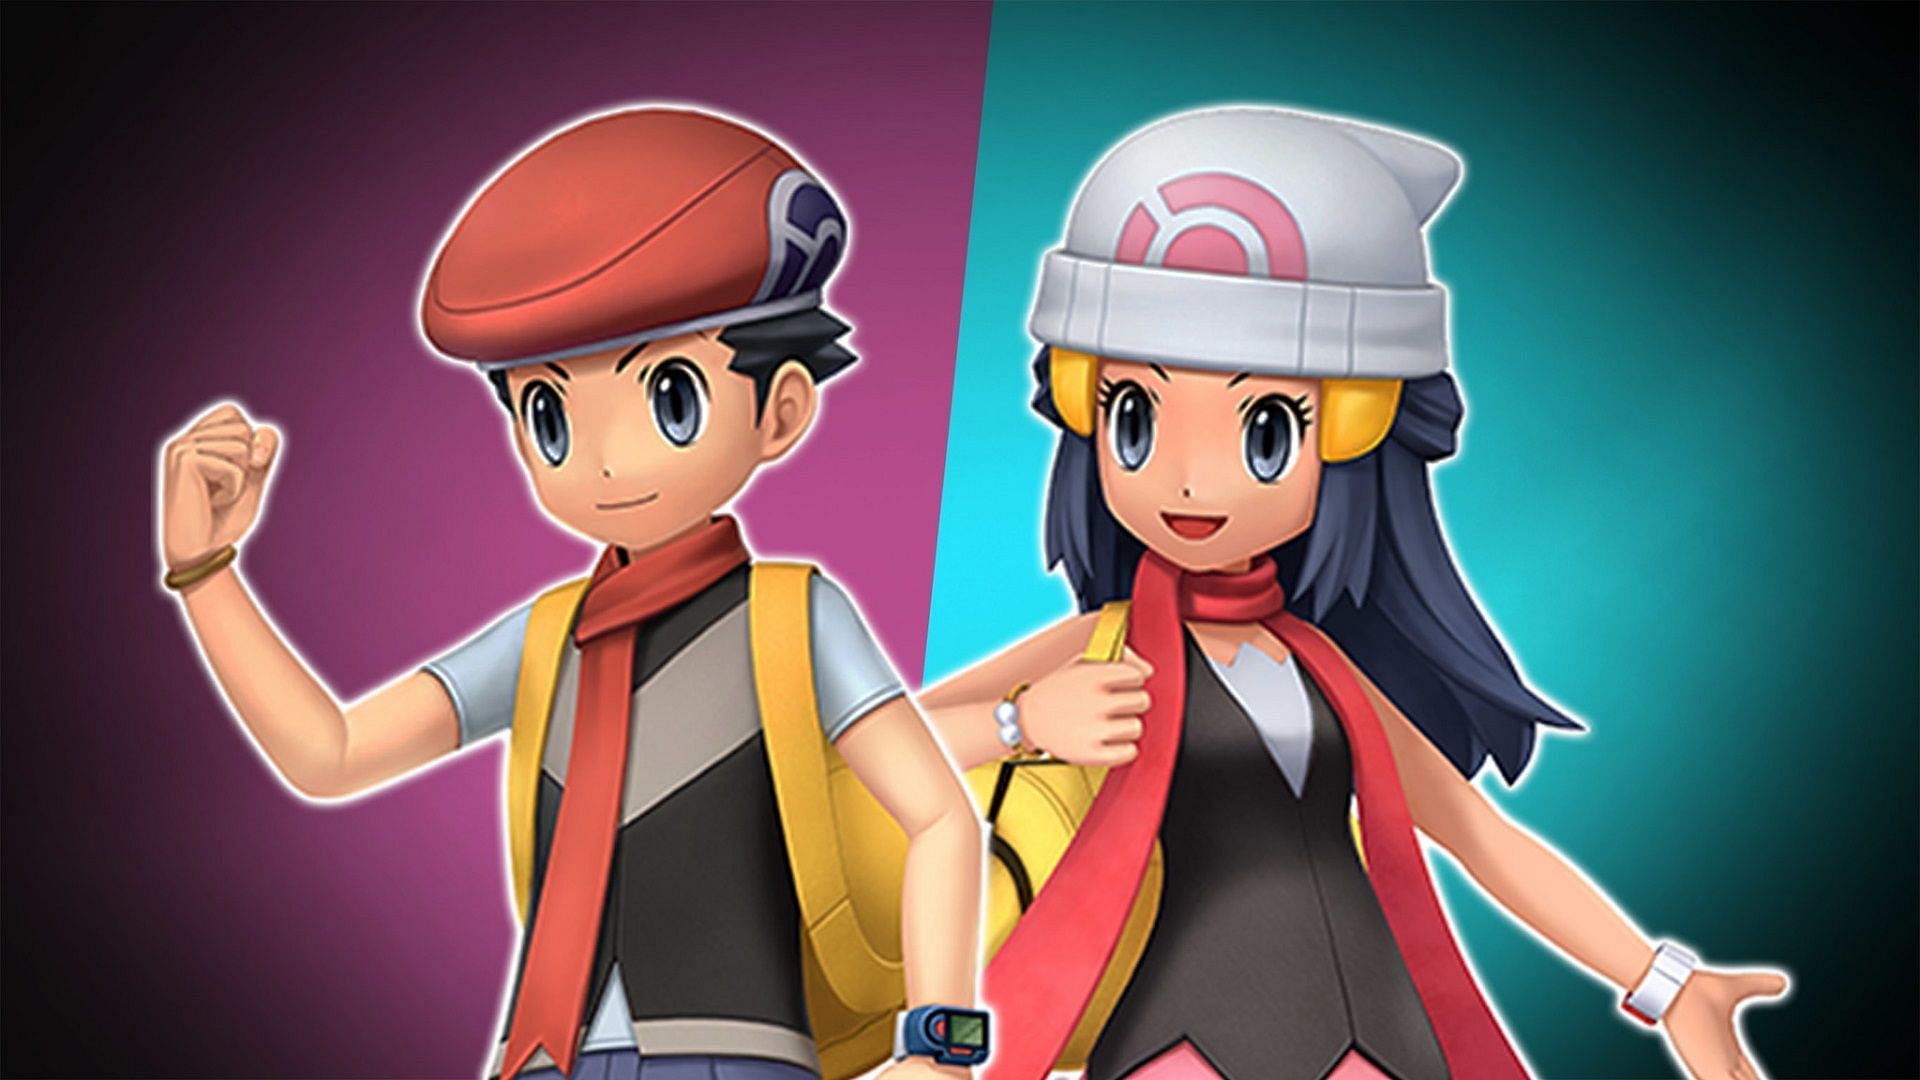 Dawn may be the Dppt Protag according to Masters : r/PokemonMasters